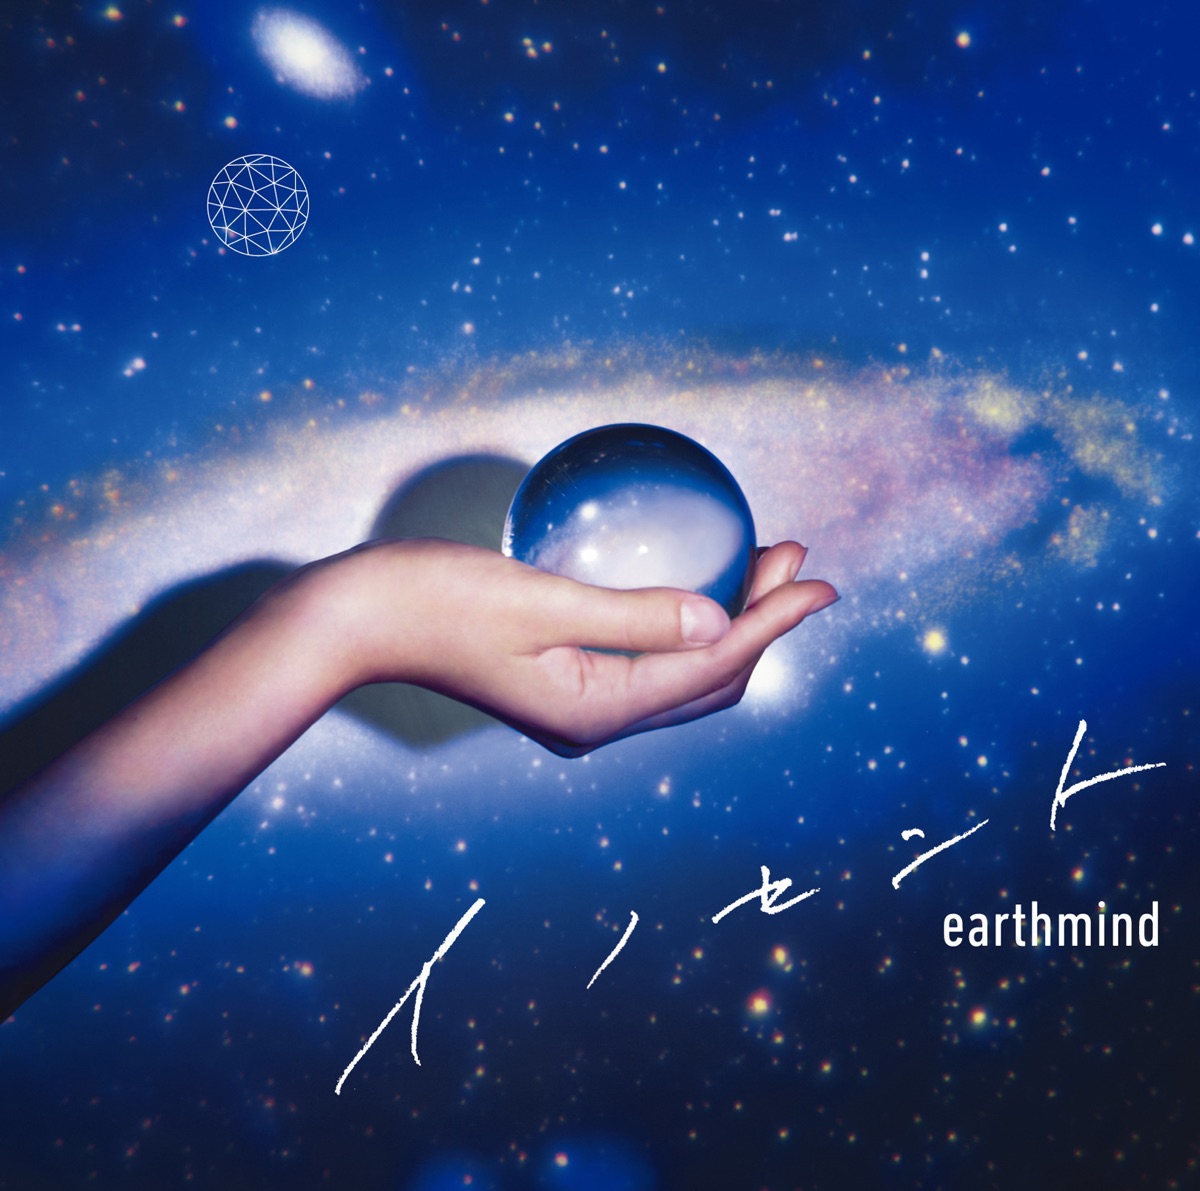 Cover art for『earthmind - Fantasyster』from the release『Innocent』